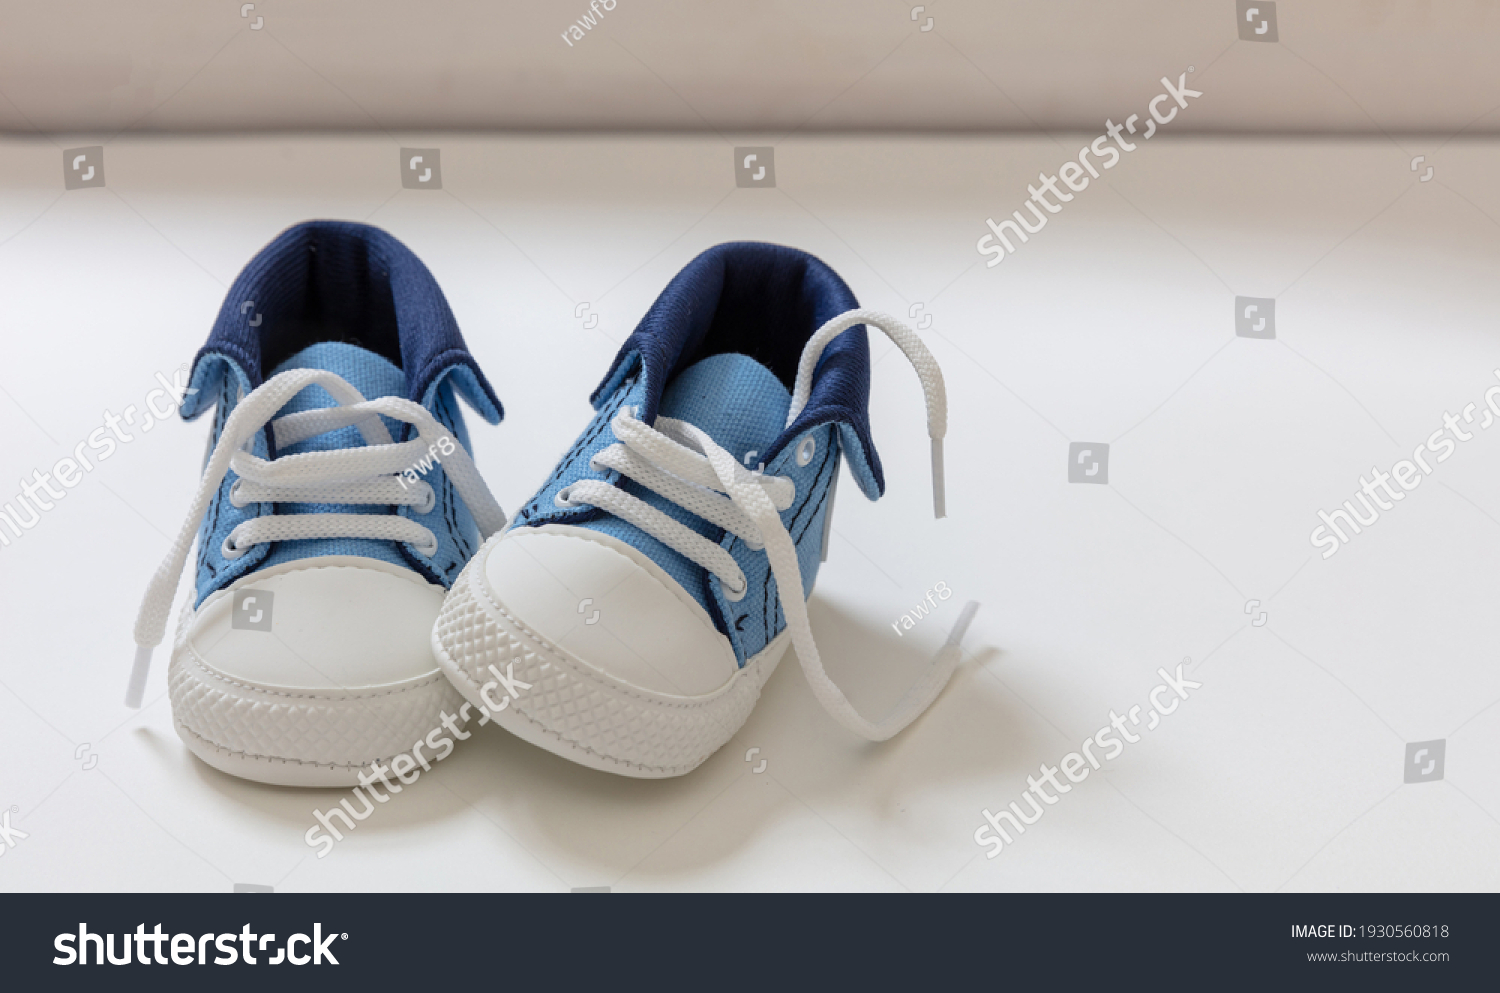 Baby boy sport shoes on white color background. Kid small size blue sneakers, canvas booties closeup view. Space, card invitation template #1930560818